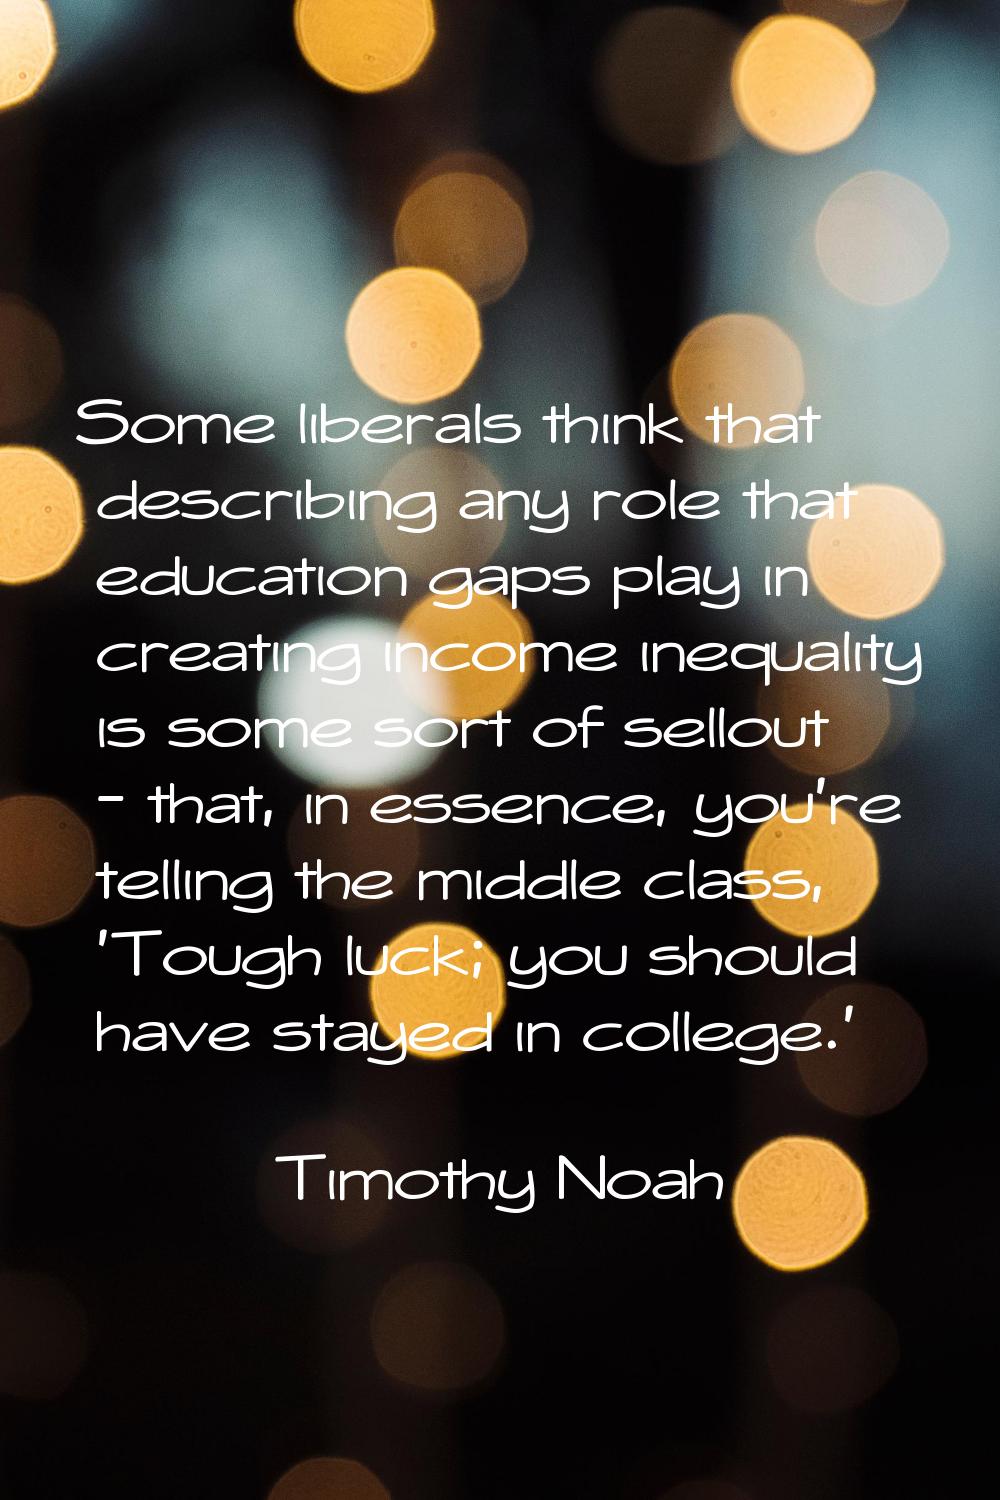 Some liberals think that describing any role that education gaps play in creating income inequality